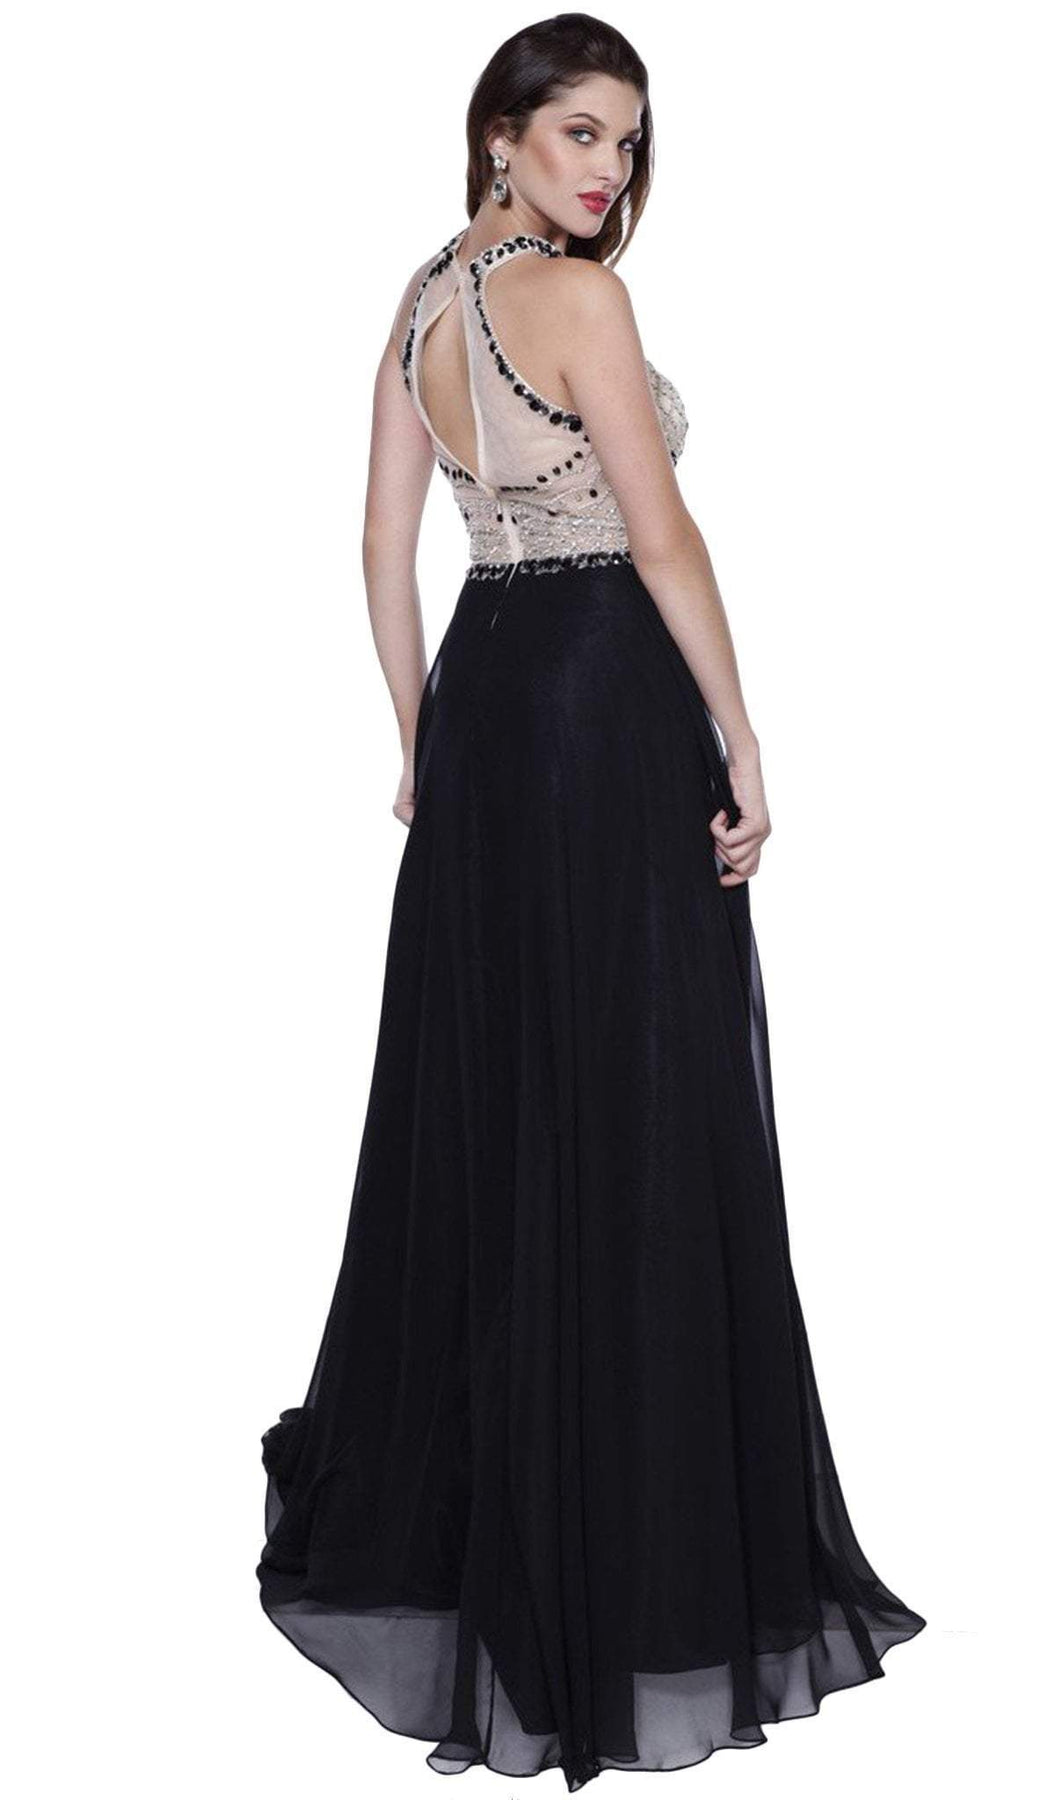 Nox Anabel - 8200 Bejeweled Halter Chiffon A-line Dress Special Occasion Dress